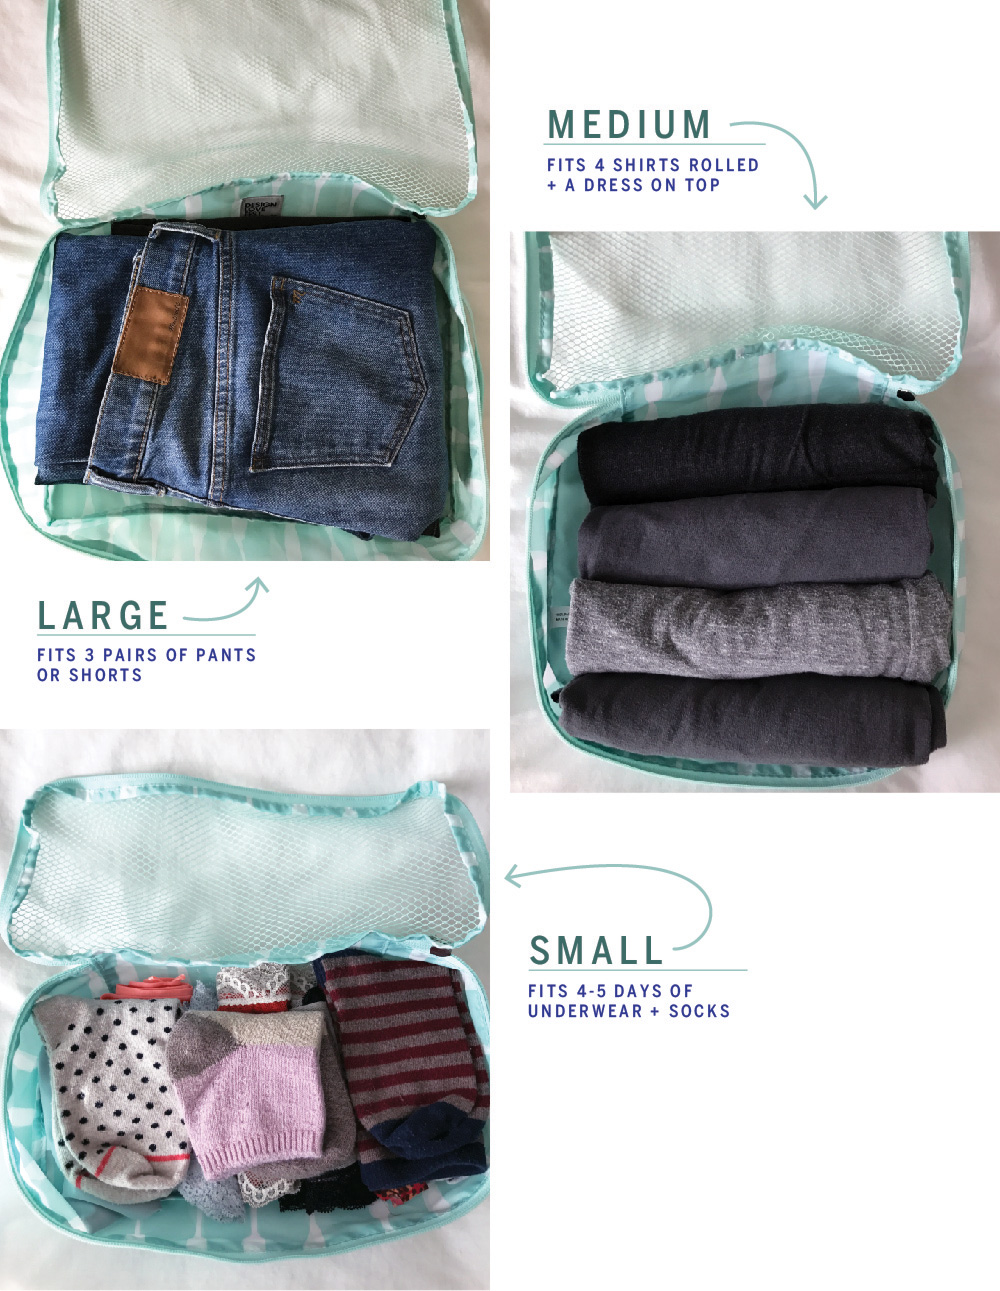 Design Love Fest packing cubes review: perfect for a weekend trip